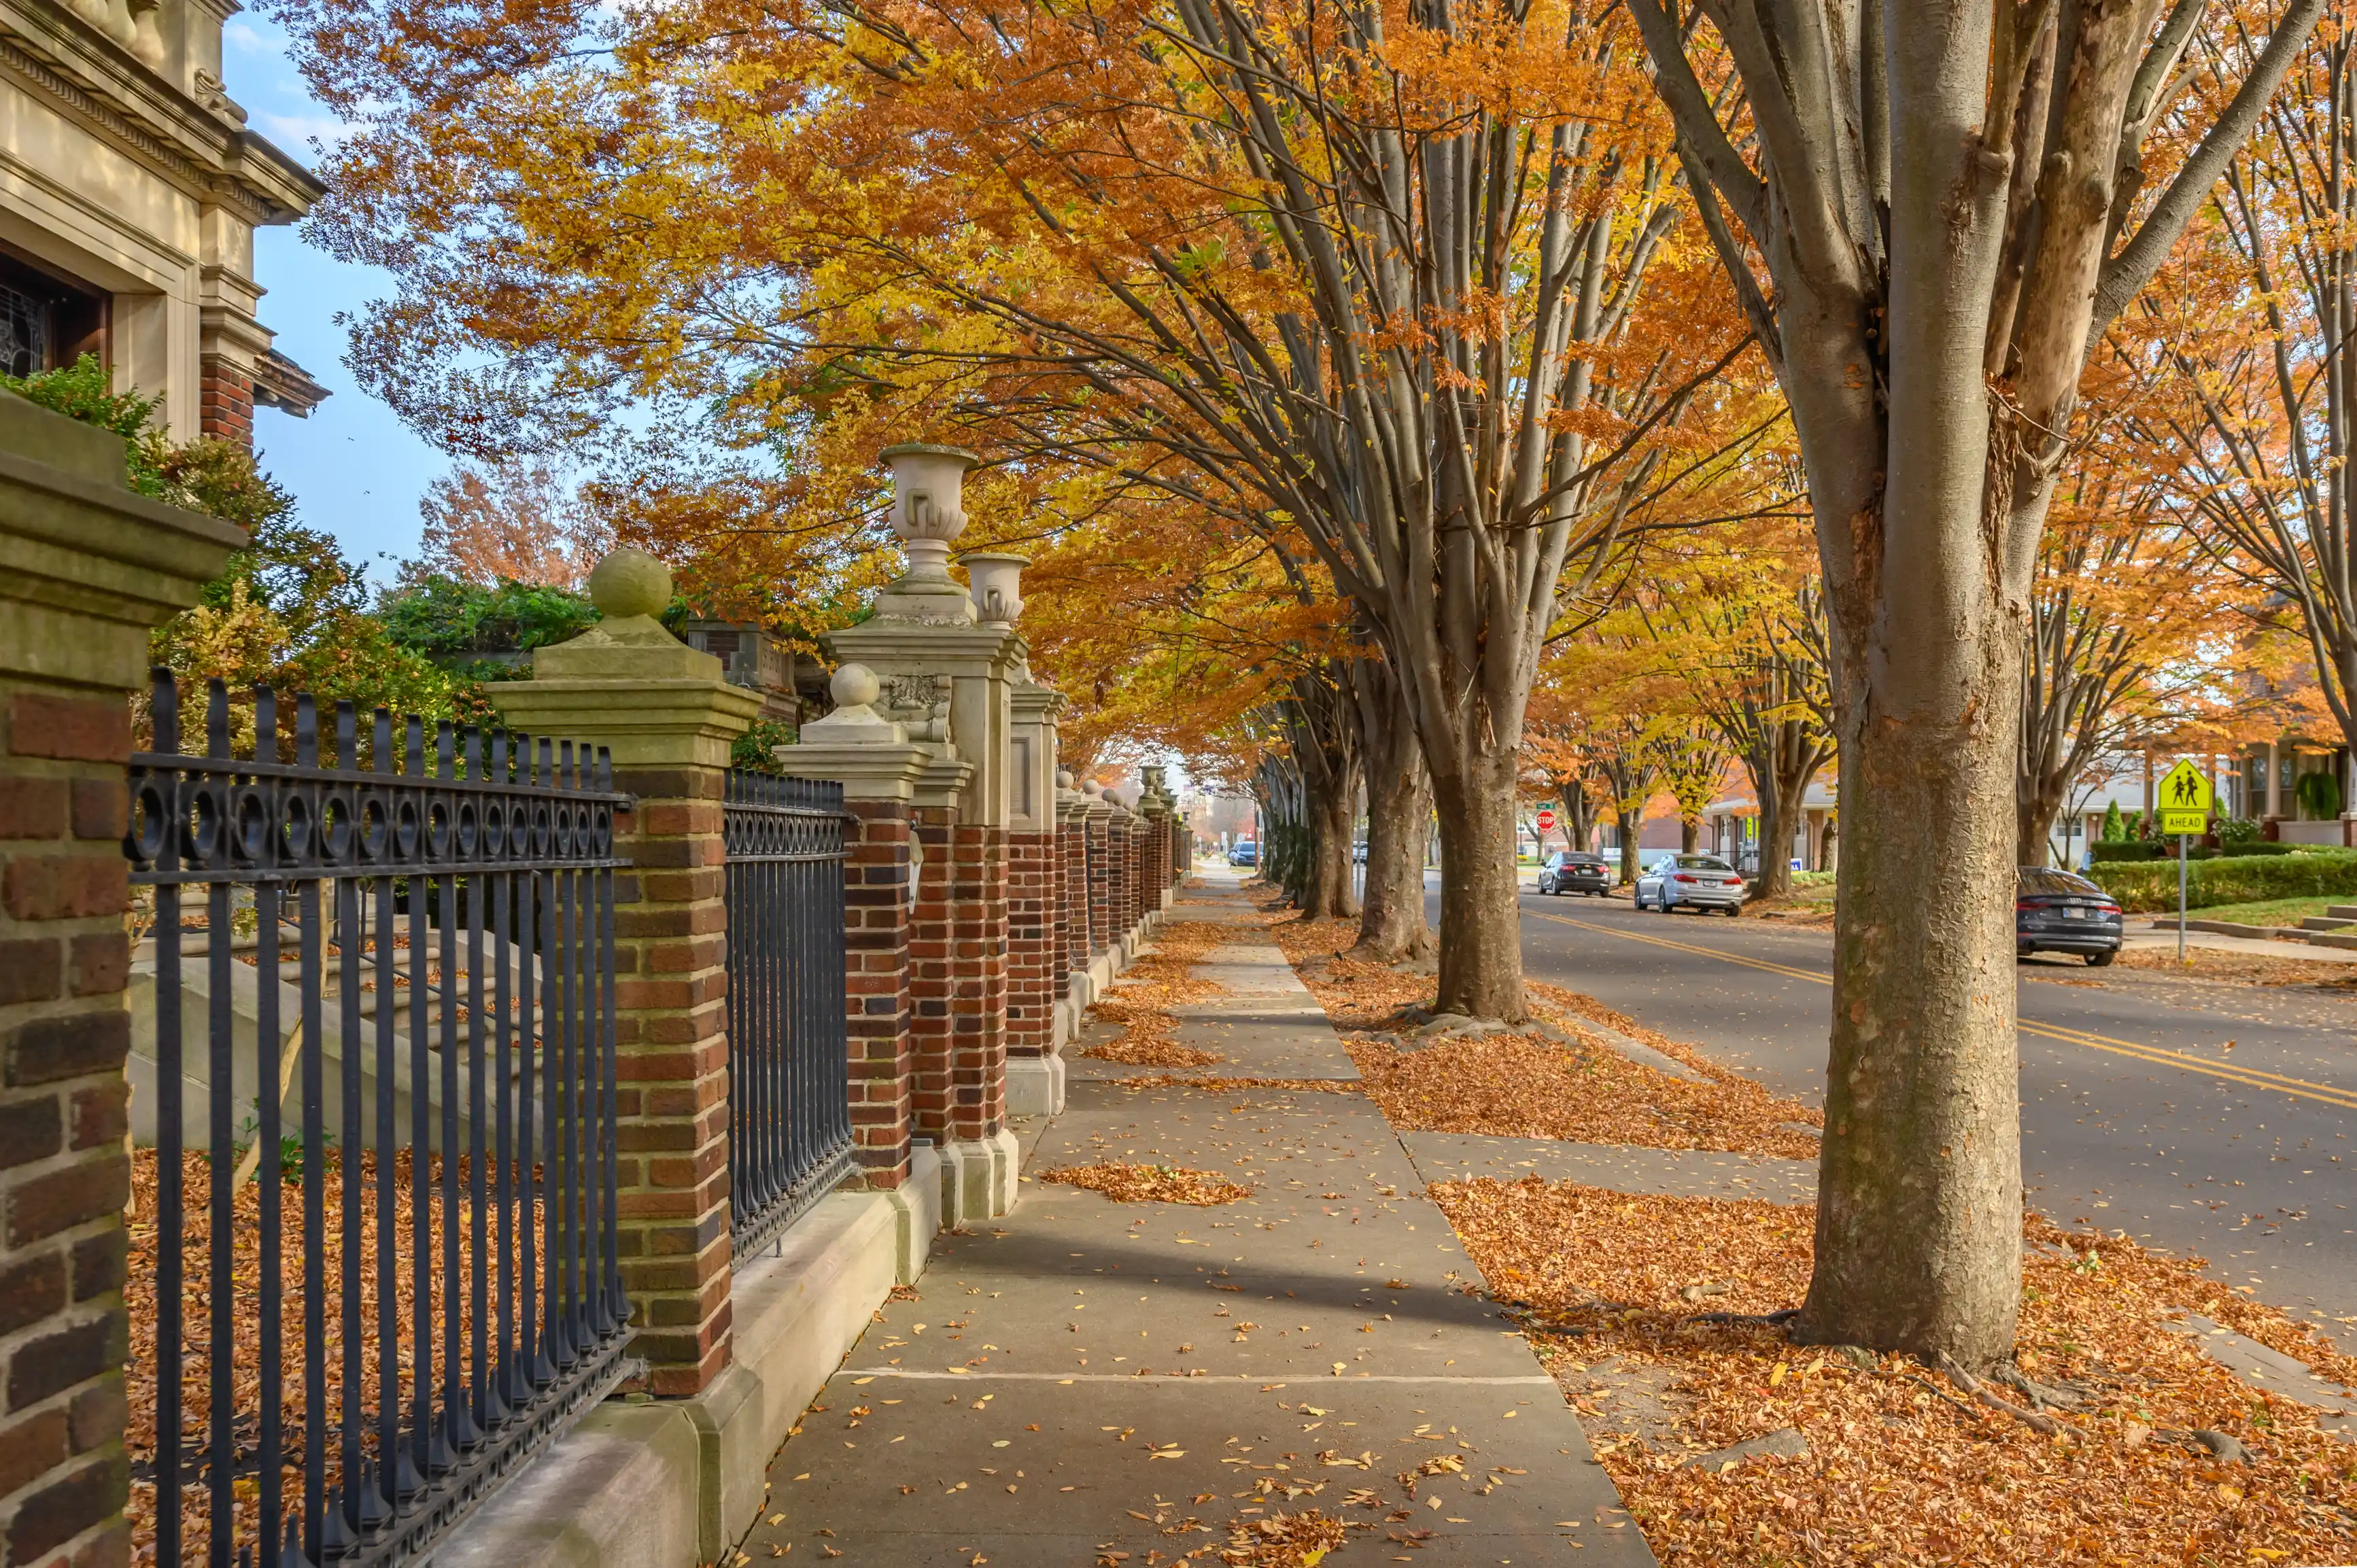 Alt: A tree-lined sidewalk in autumn with fallen leaves, an ornate metal and brick fence on one side, leading towards a vanishing point with a clear blue sky above.